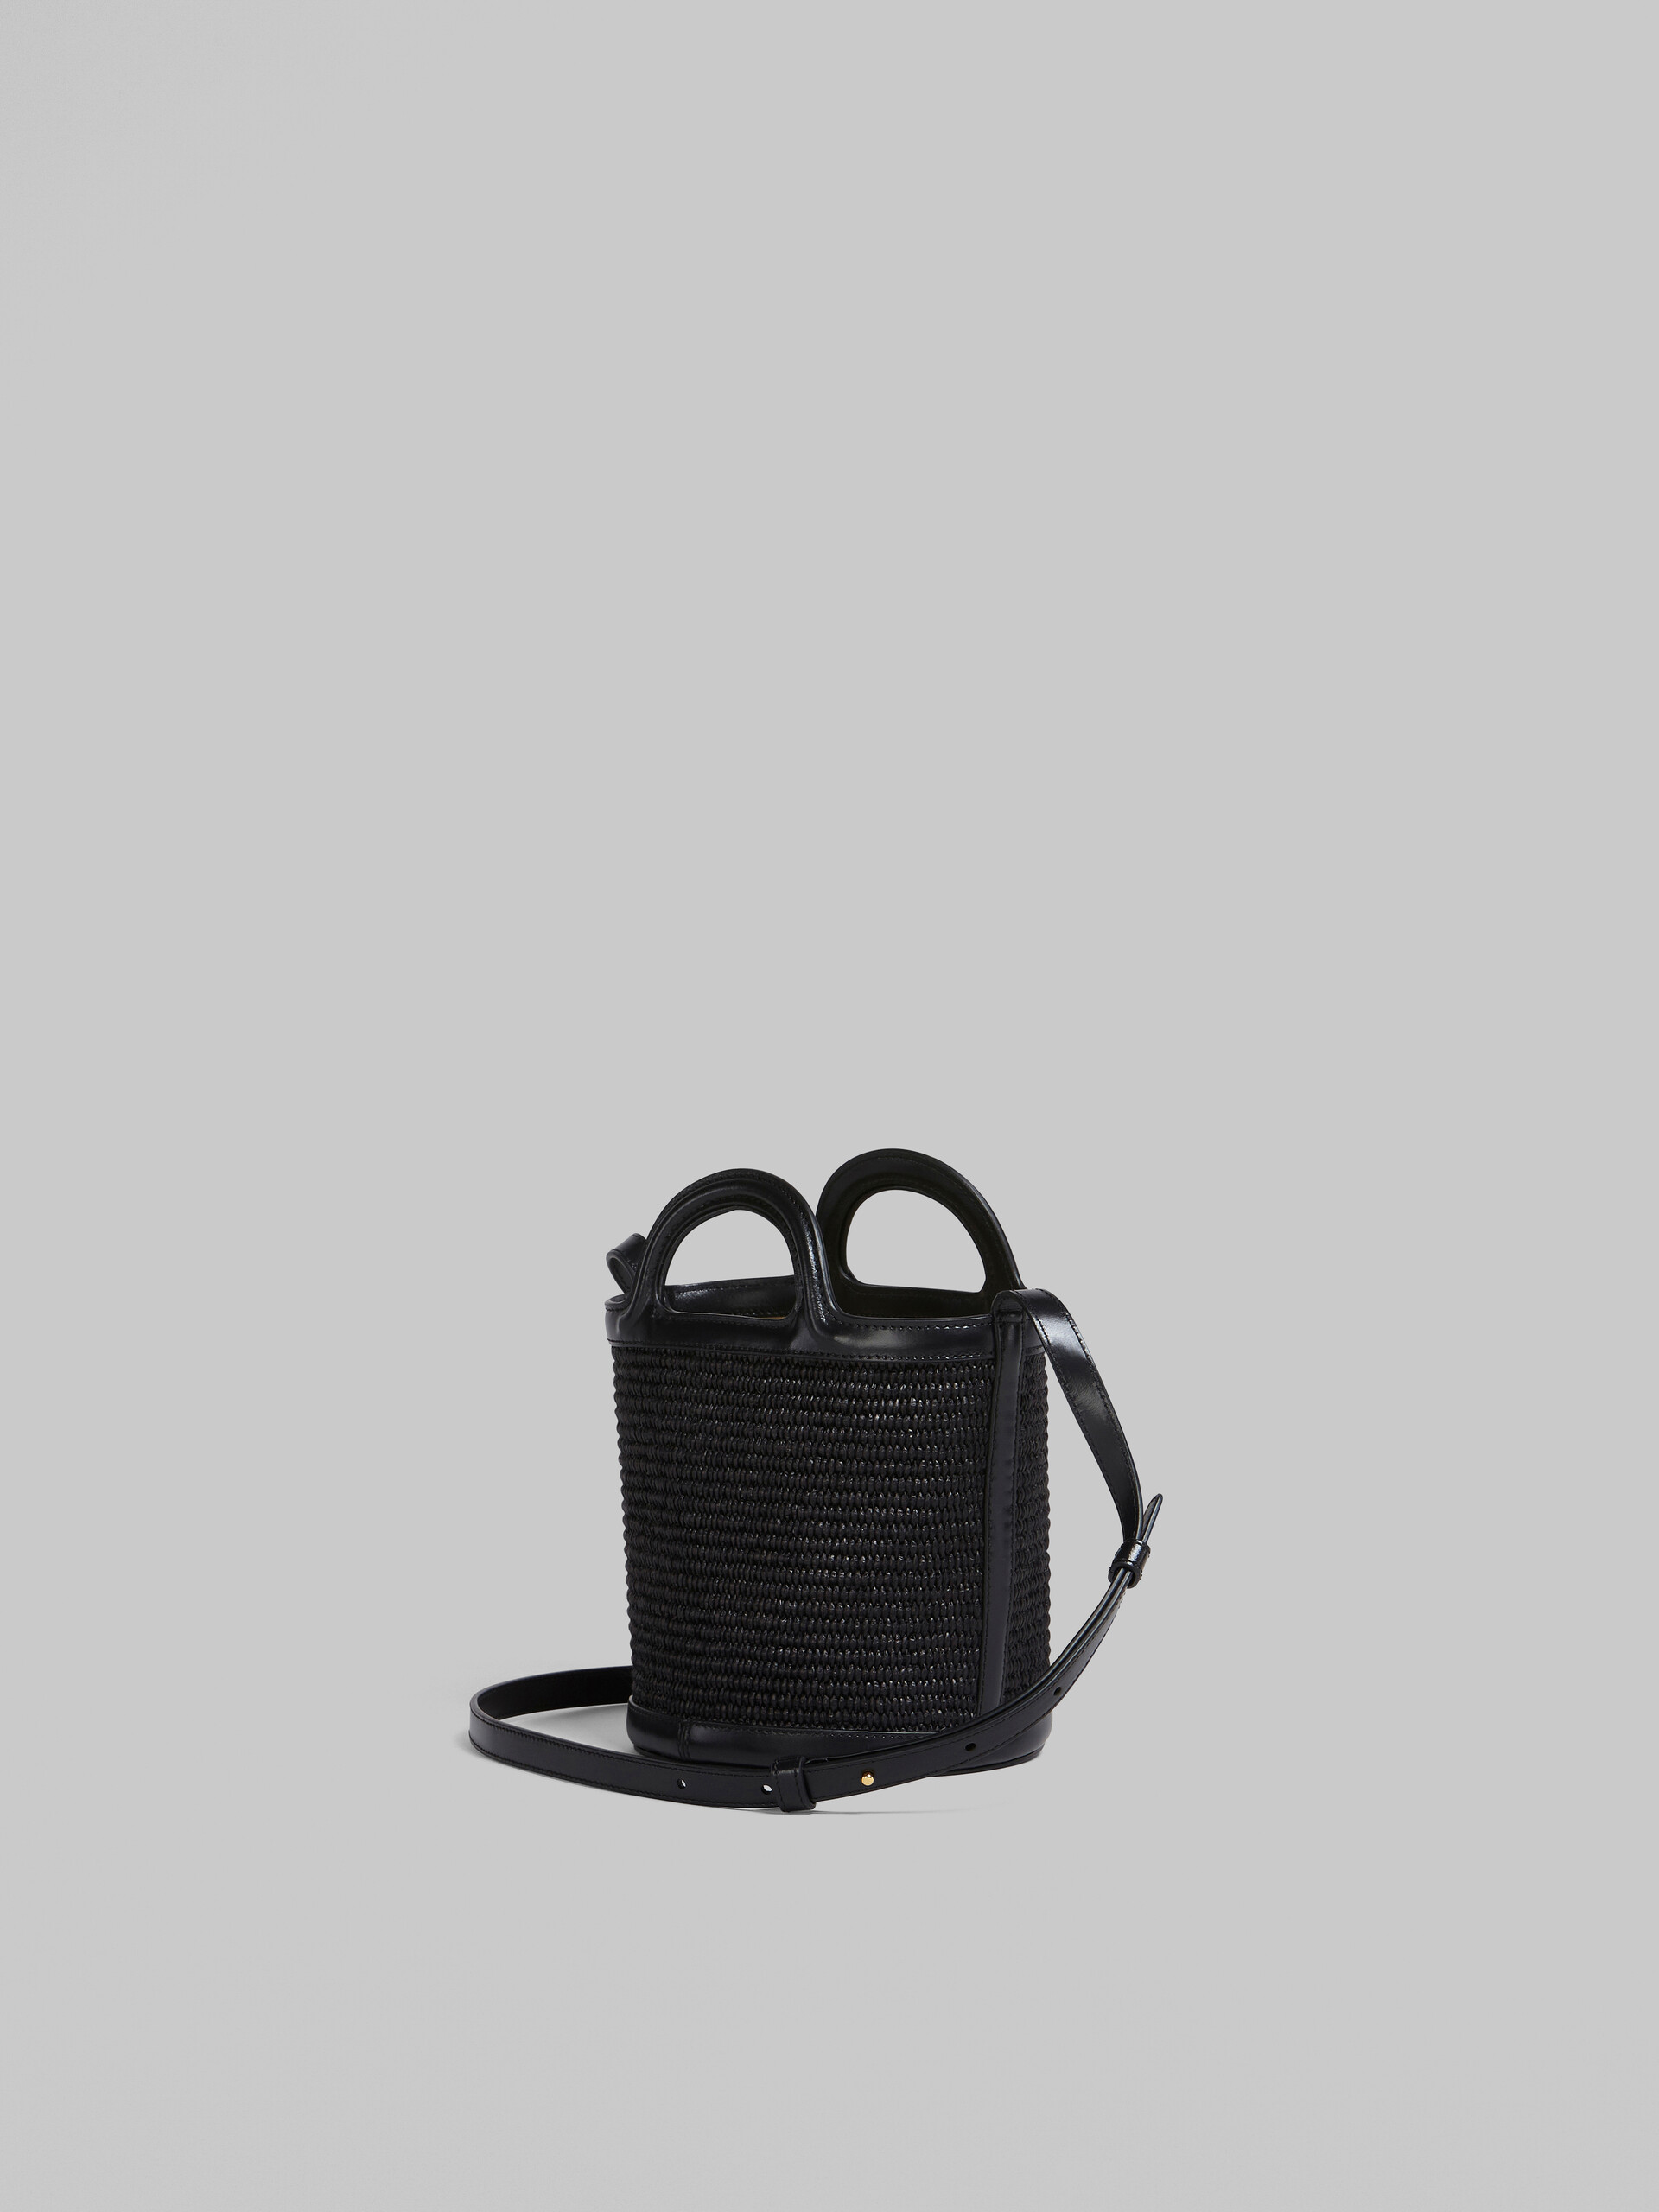 Tropicalia Small Bucket Bag in black leather and raffia - Shoulder Bags - Image 2